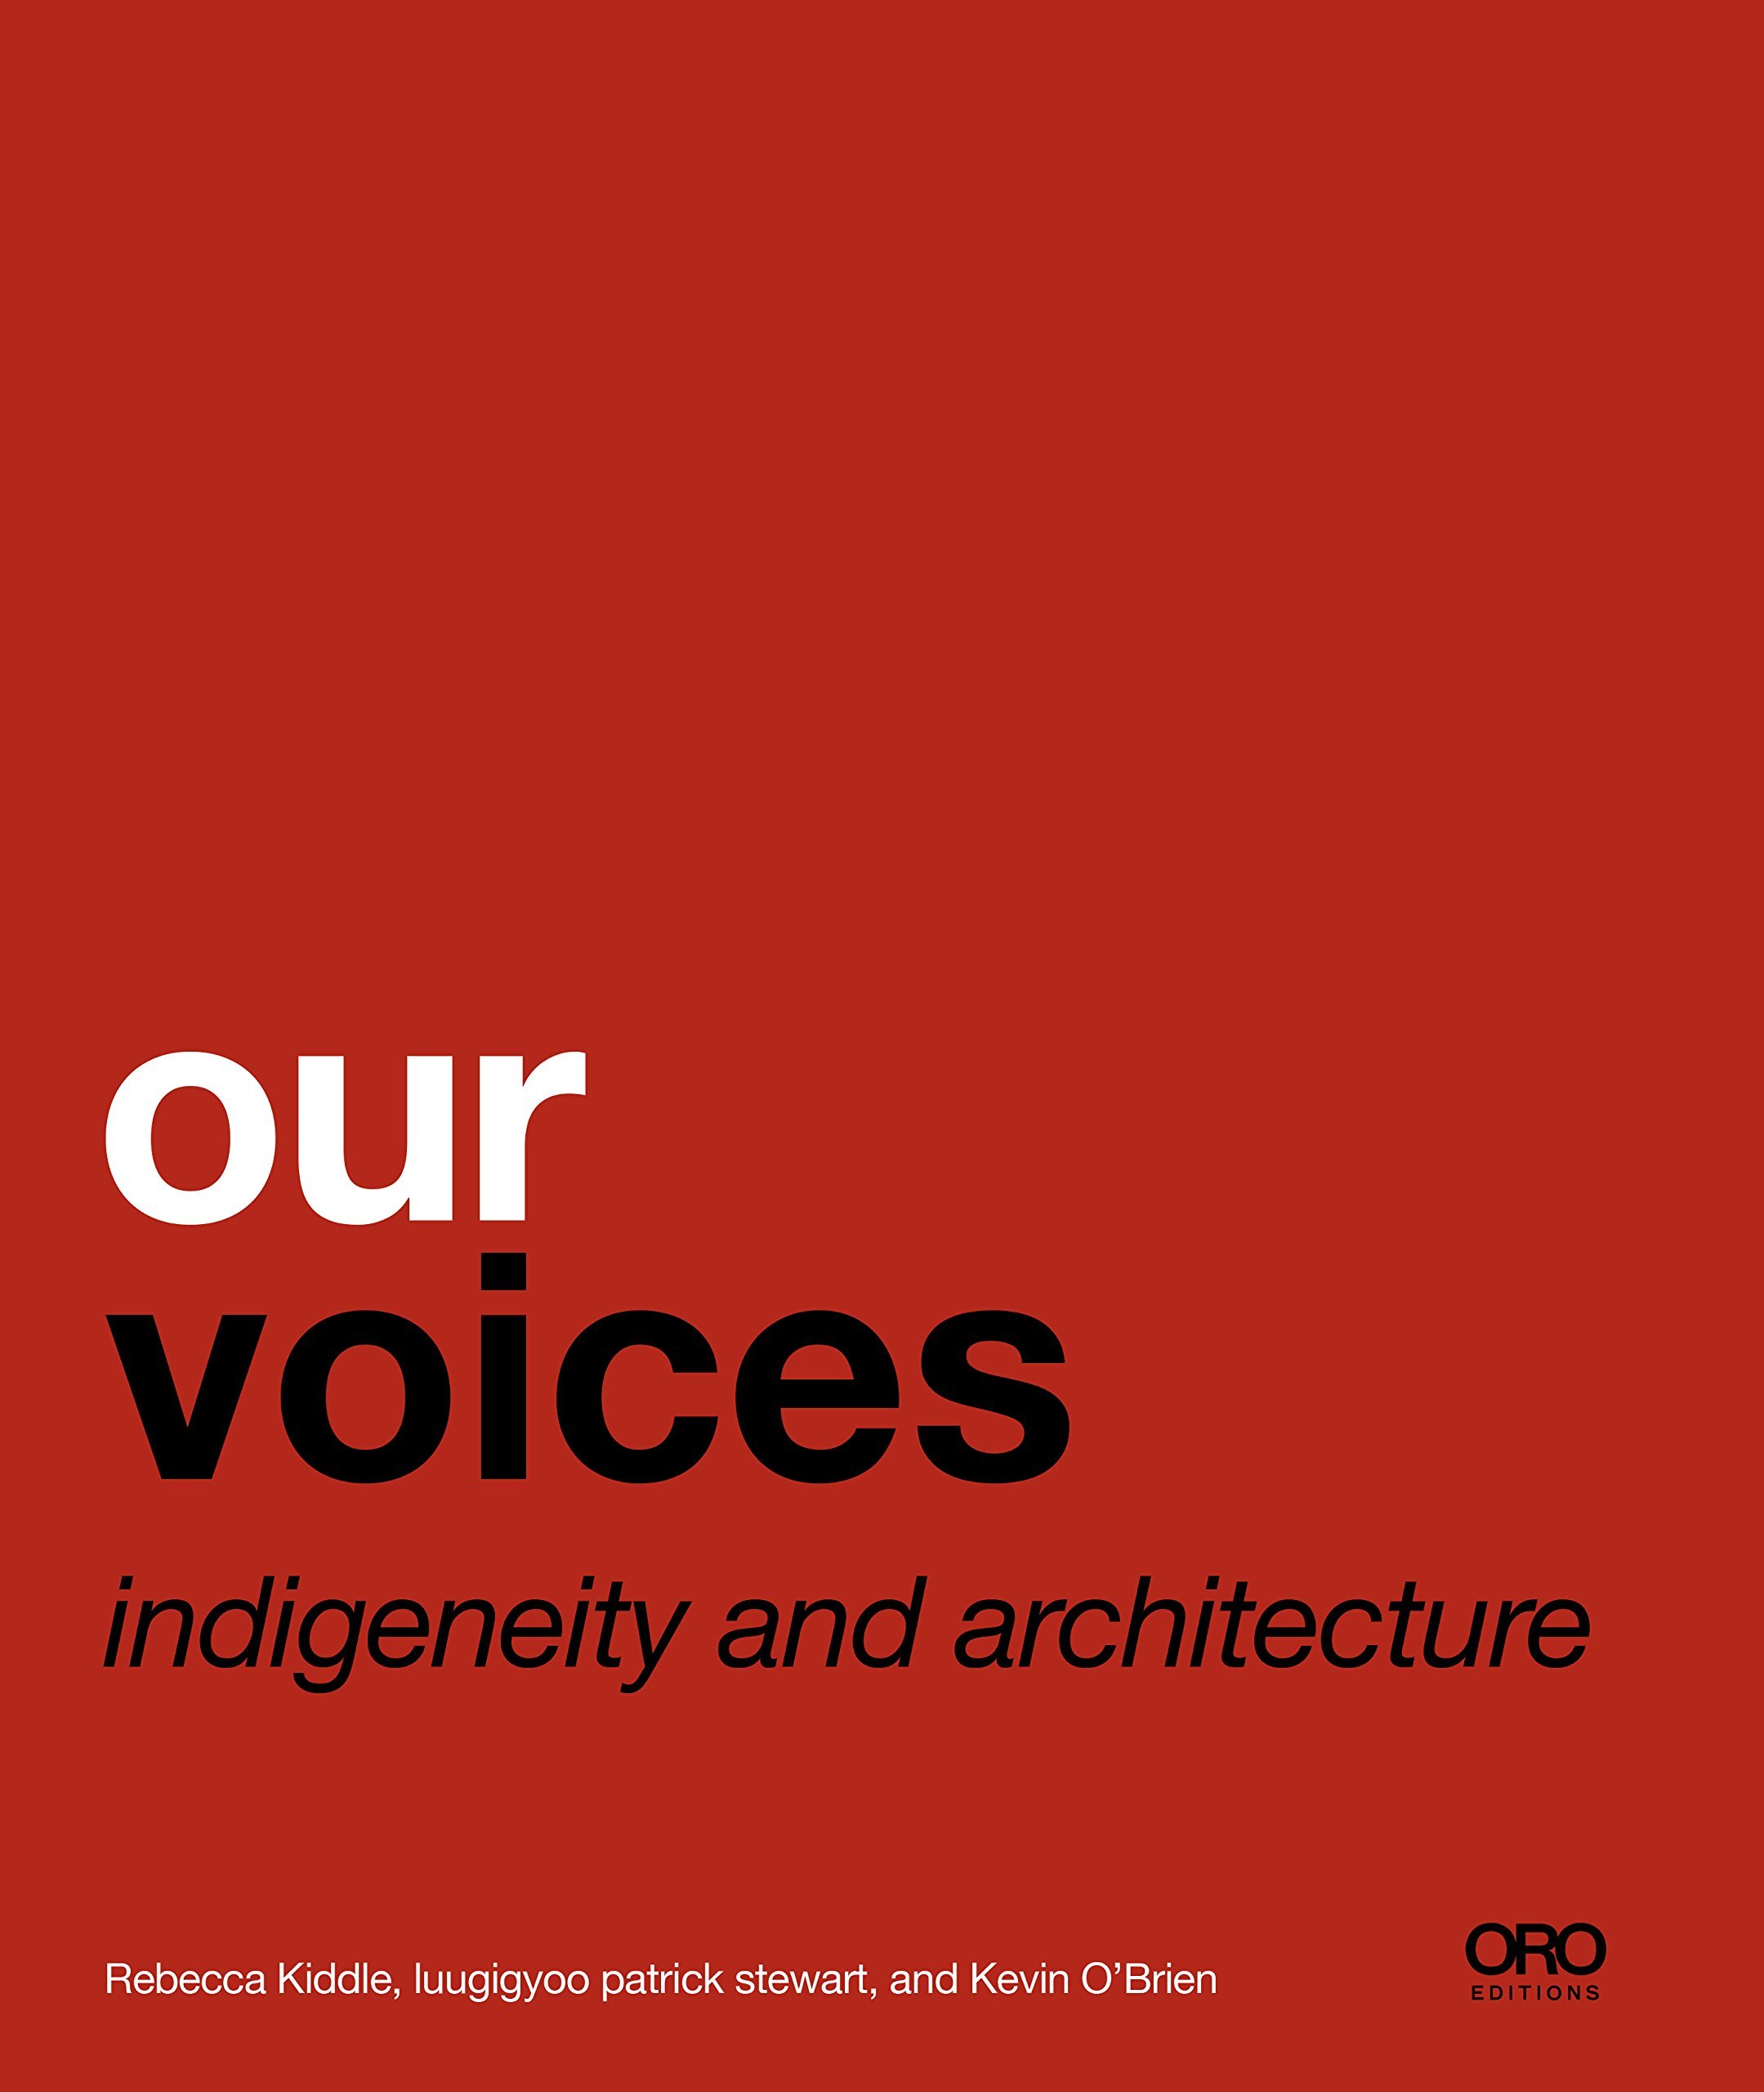 Our Voices: Indigeneity and Architecture, $63.02